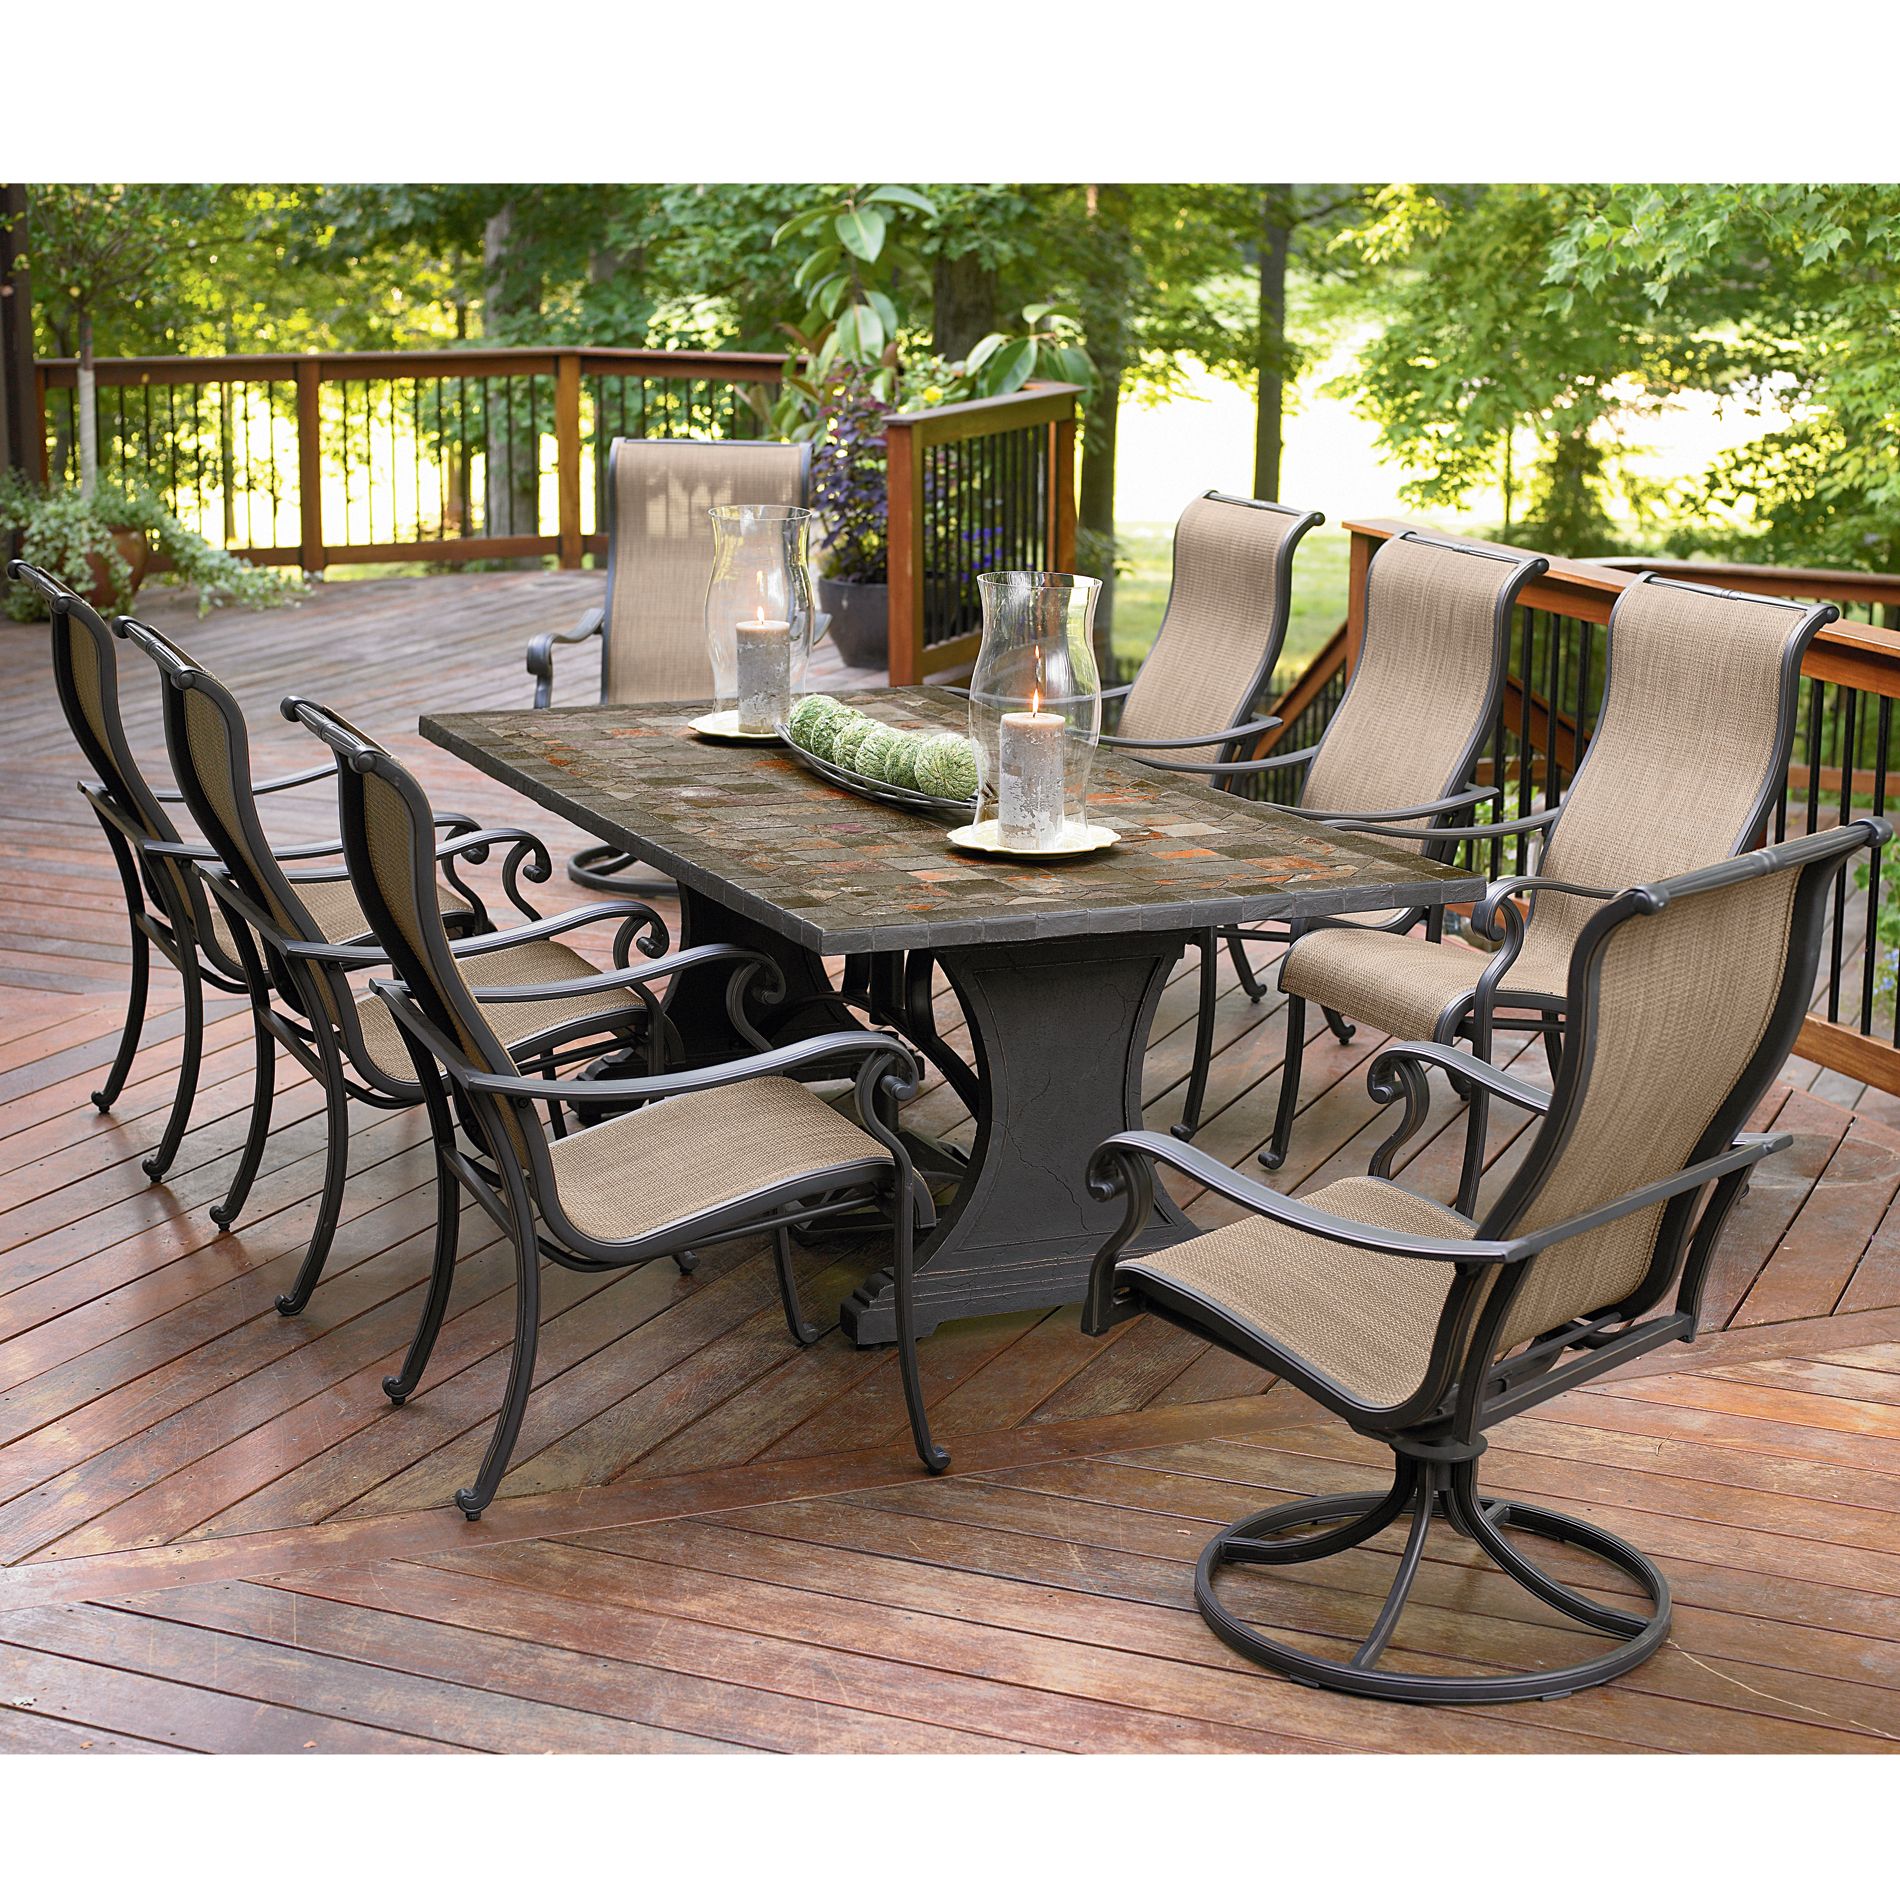 patio dining sets photo - 3